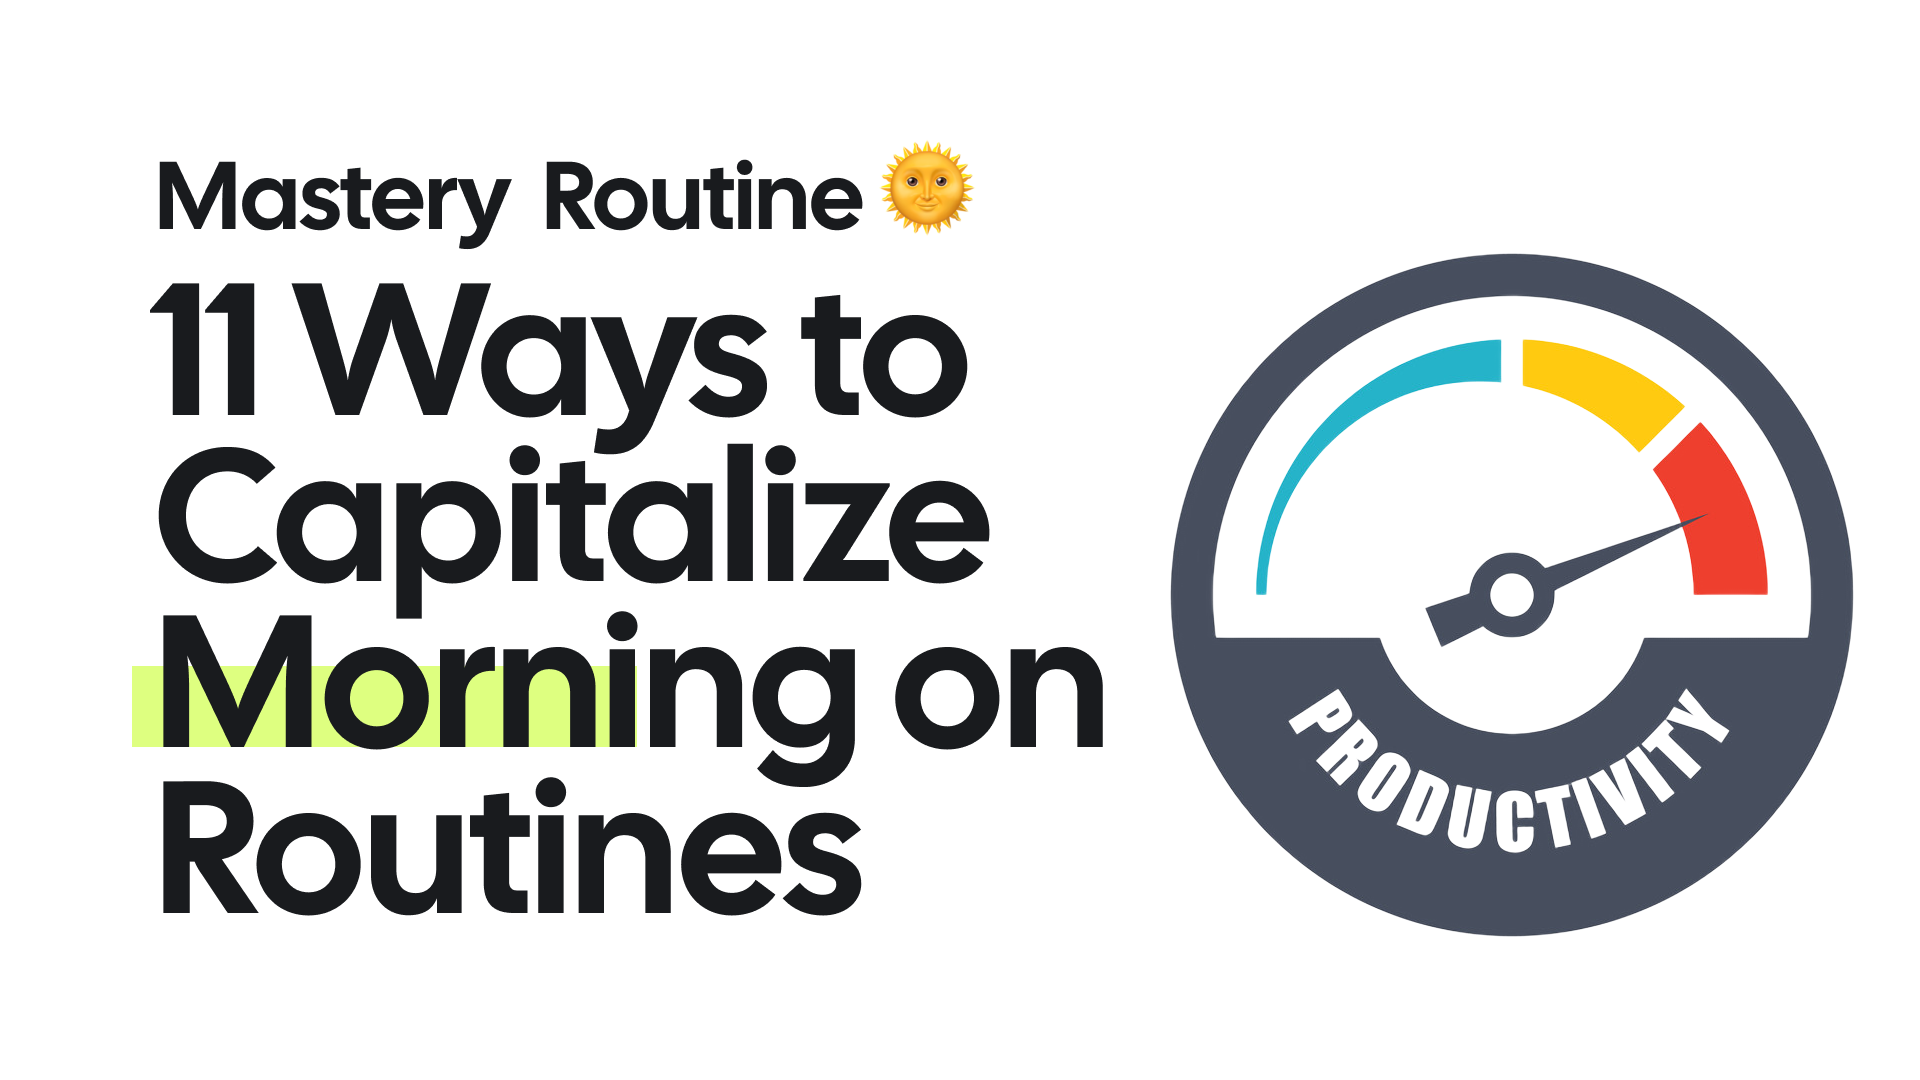 11 Morning Routines Ideas - Business Routines to Capitalize on Productivity